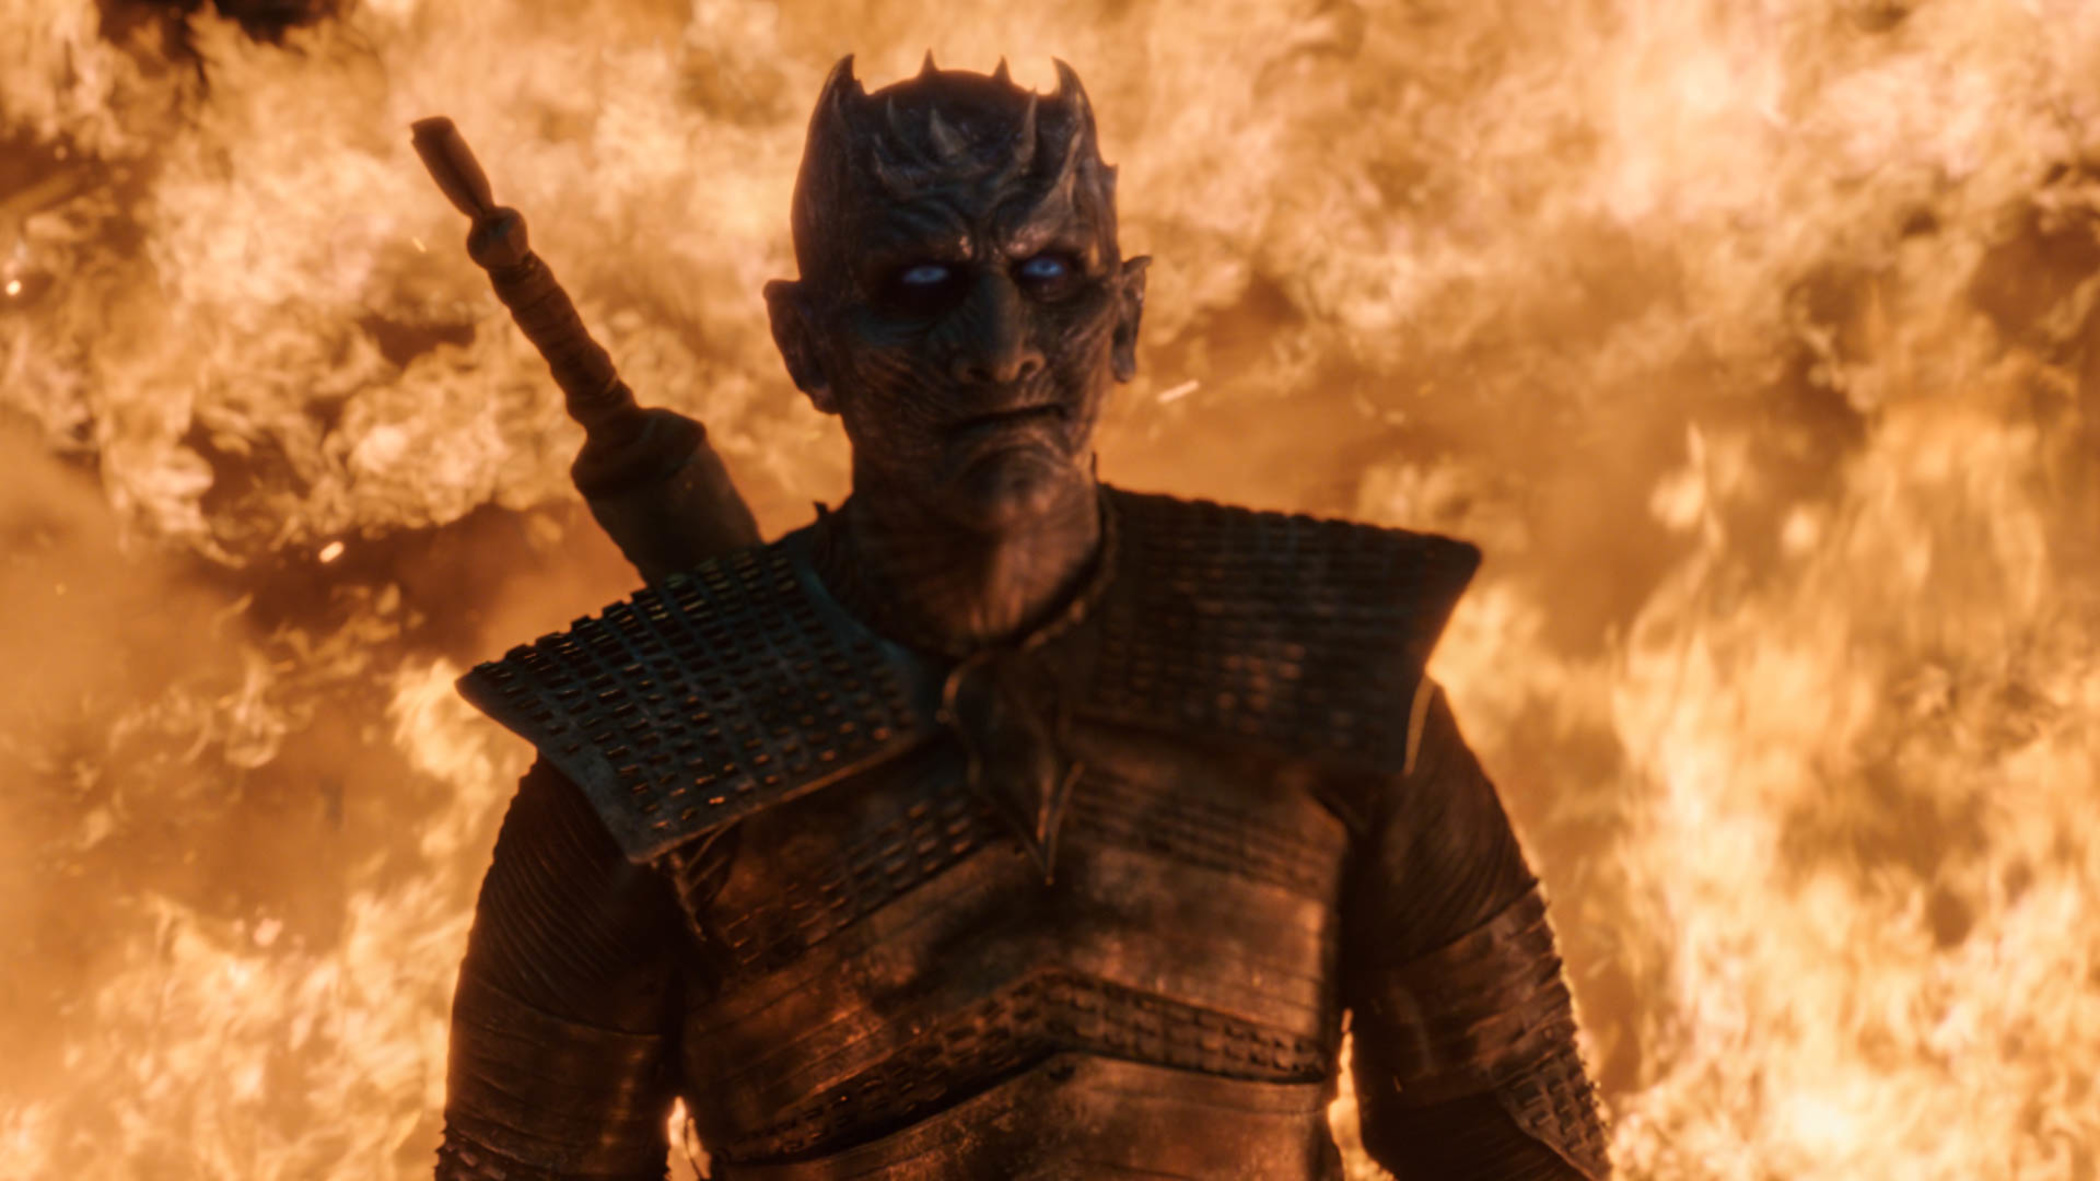 The Night King walking through flames in “Game of Thrones.”